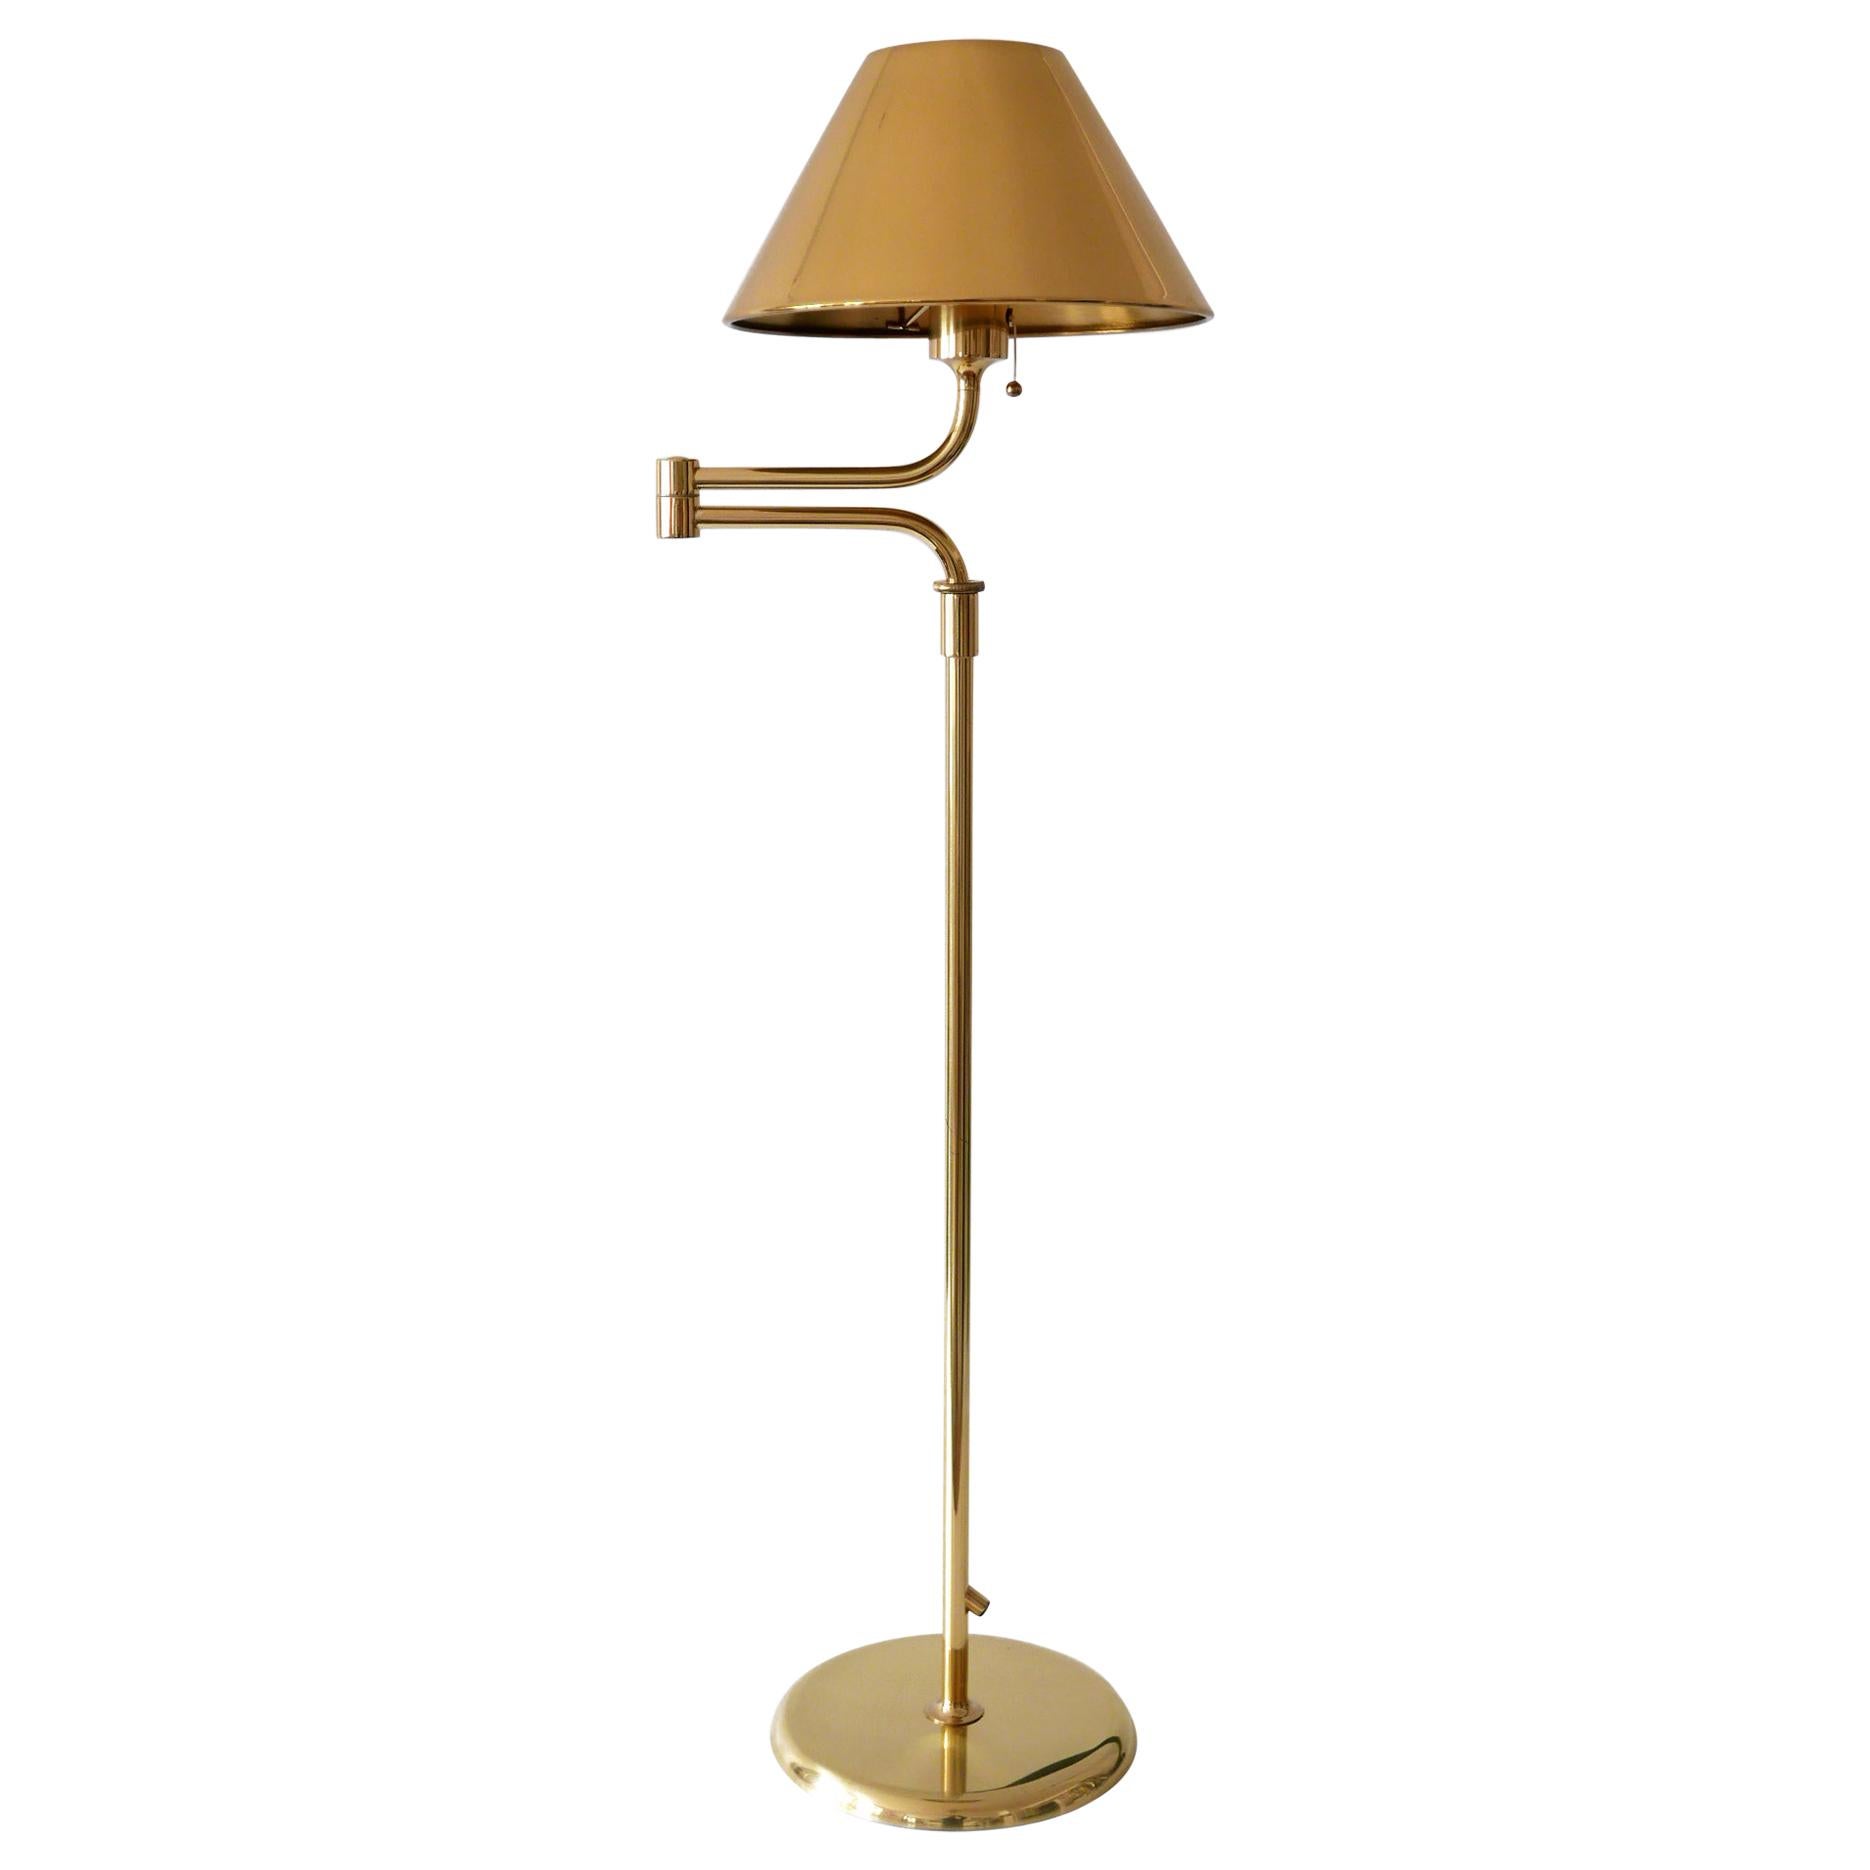 Articulated Brass Floor Lamp or Reading Light by Florian Schulz 1980s Germany